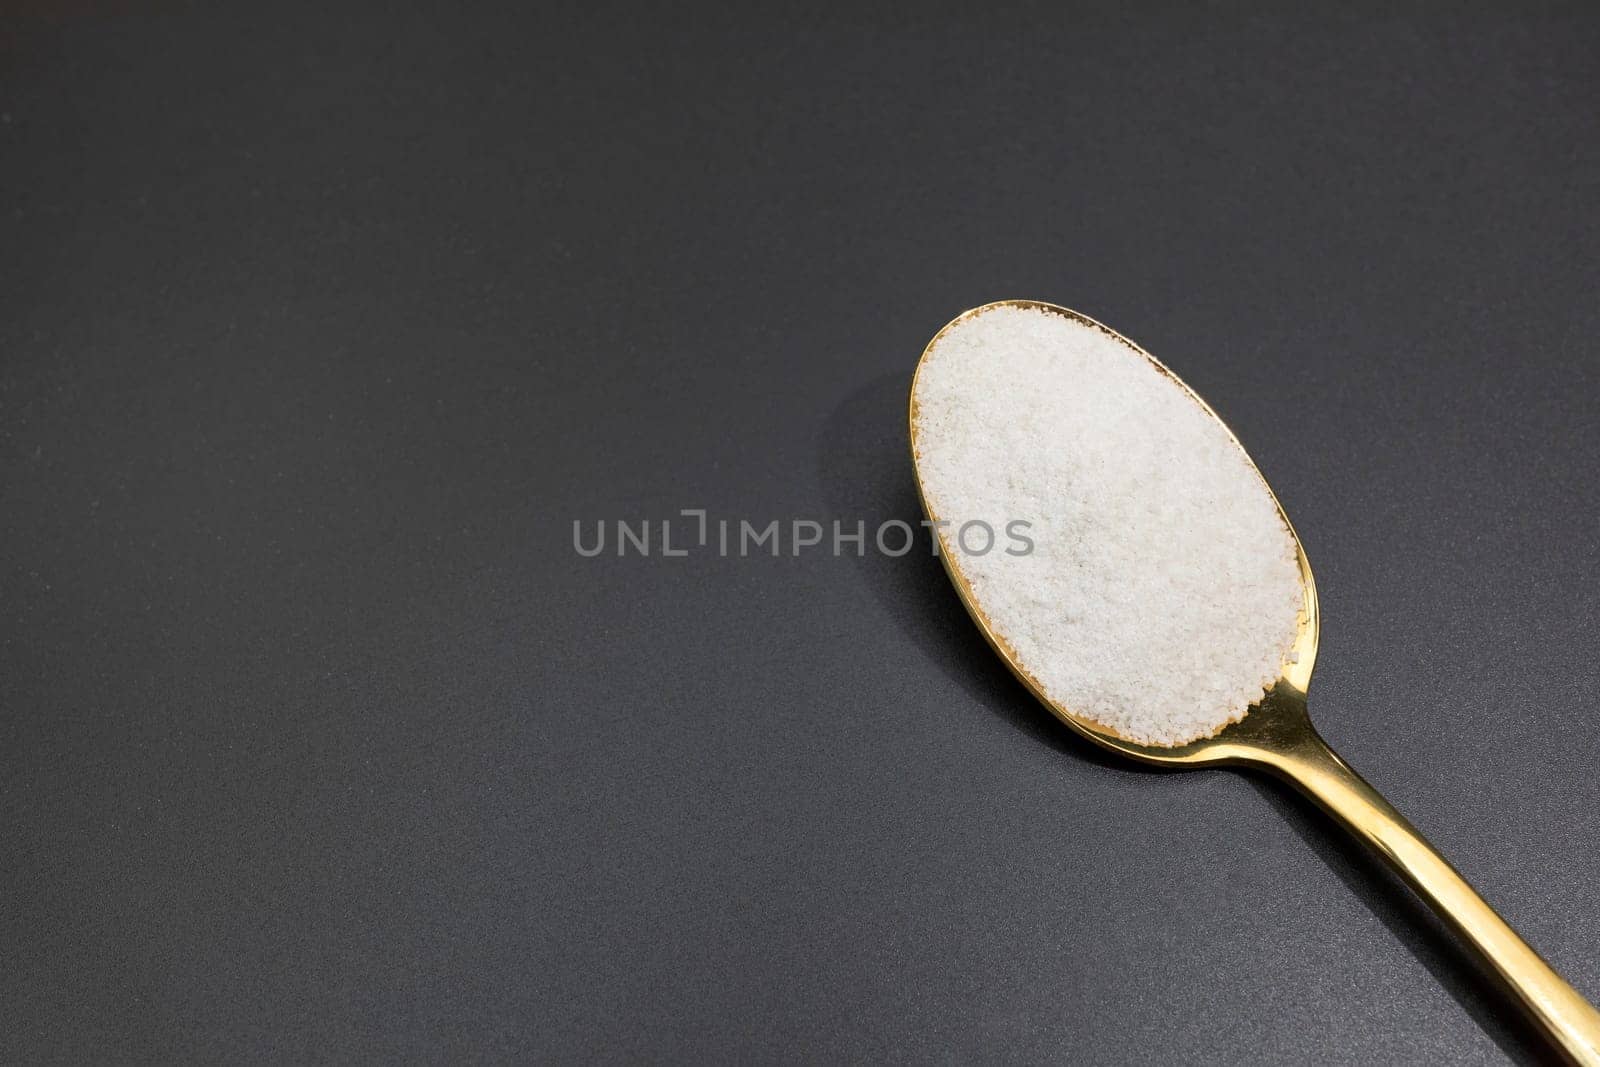 Design Celtic Gray Sea Salt In Golden Spoon on Dark Table, Copy Space. Horizontal Plane. Natural And Unrefined Salt Harvested From Brittany, France. Natural Minerals And Trace Elements, Superfood.